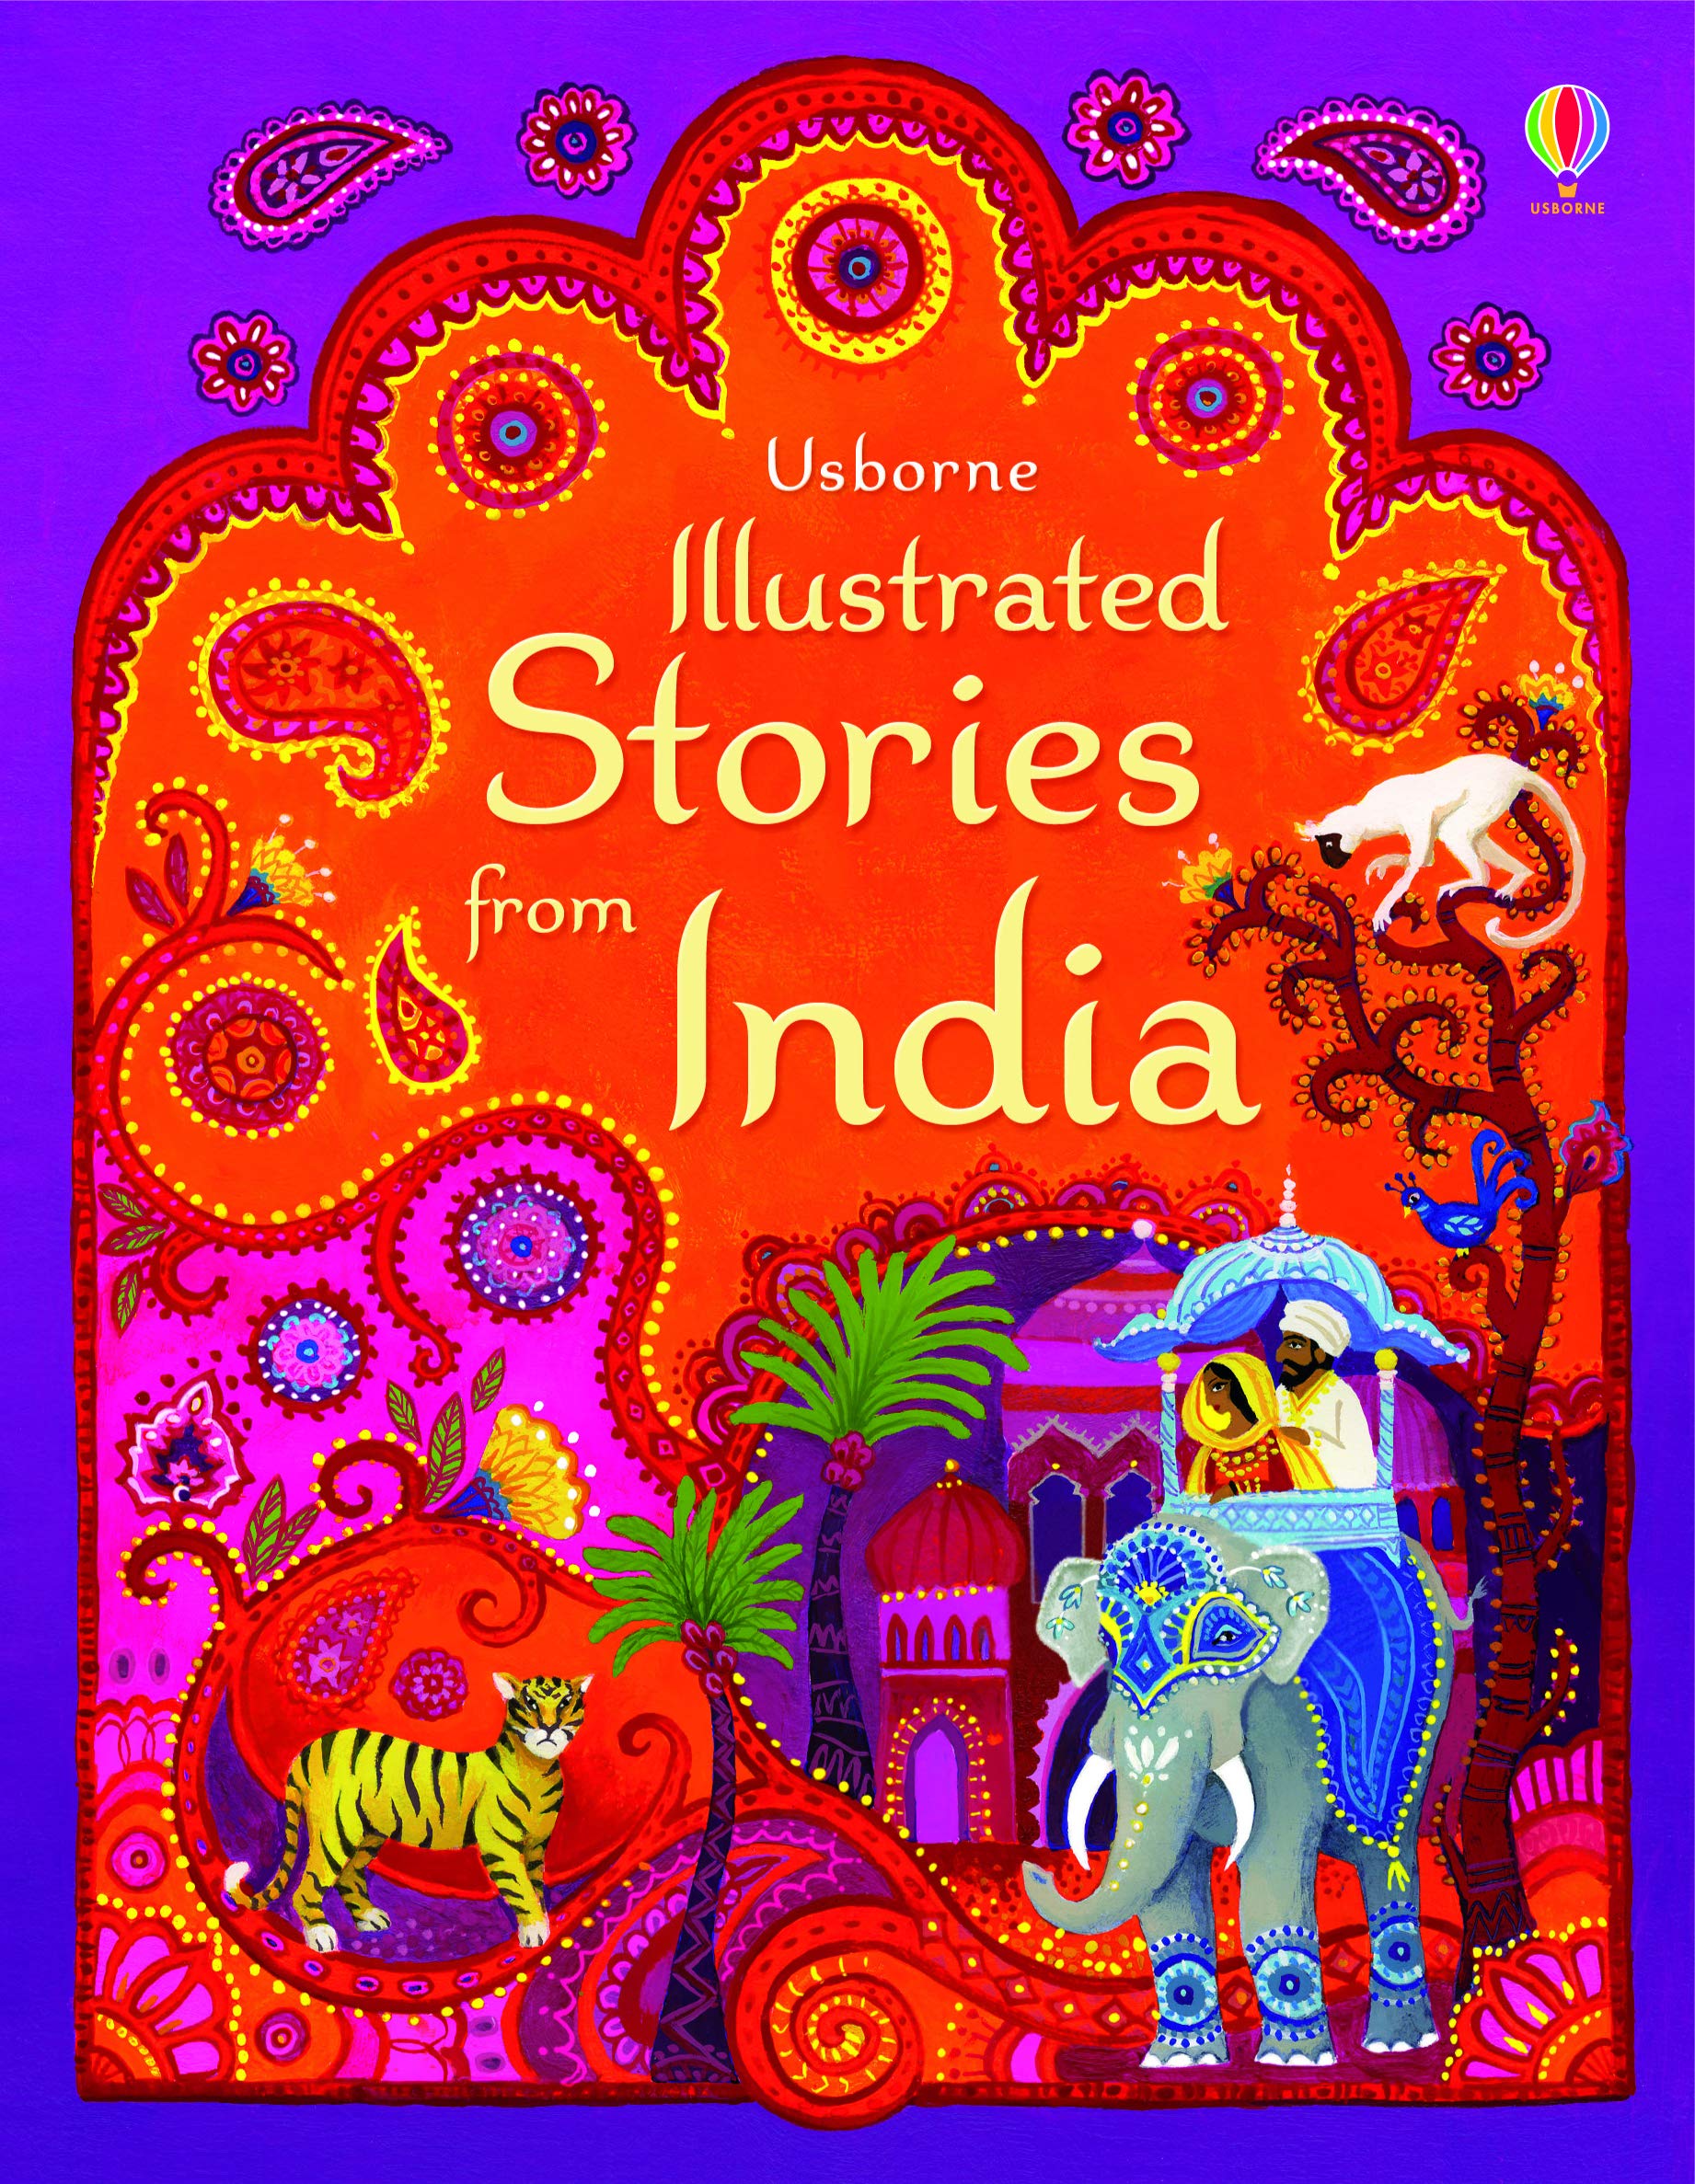 Usborne: Illustrated Stories from India